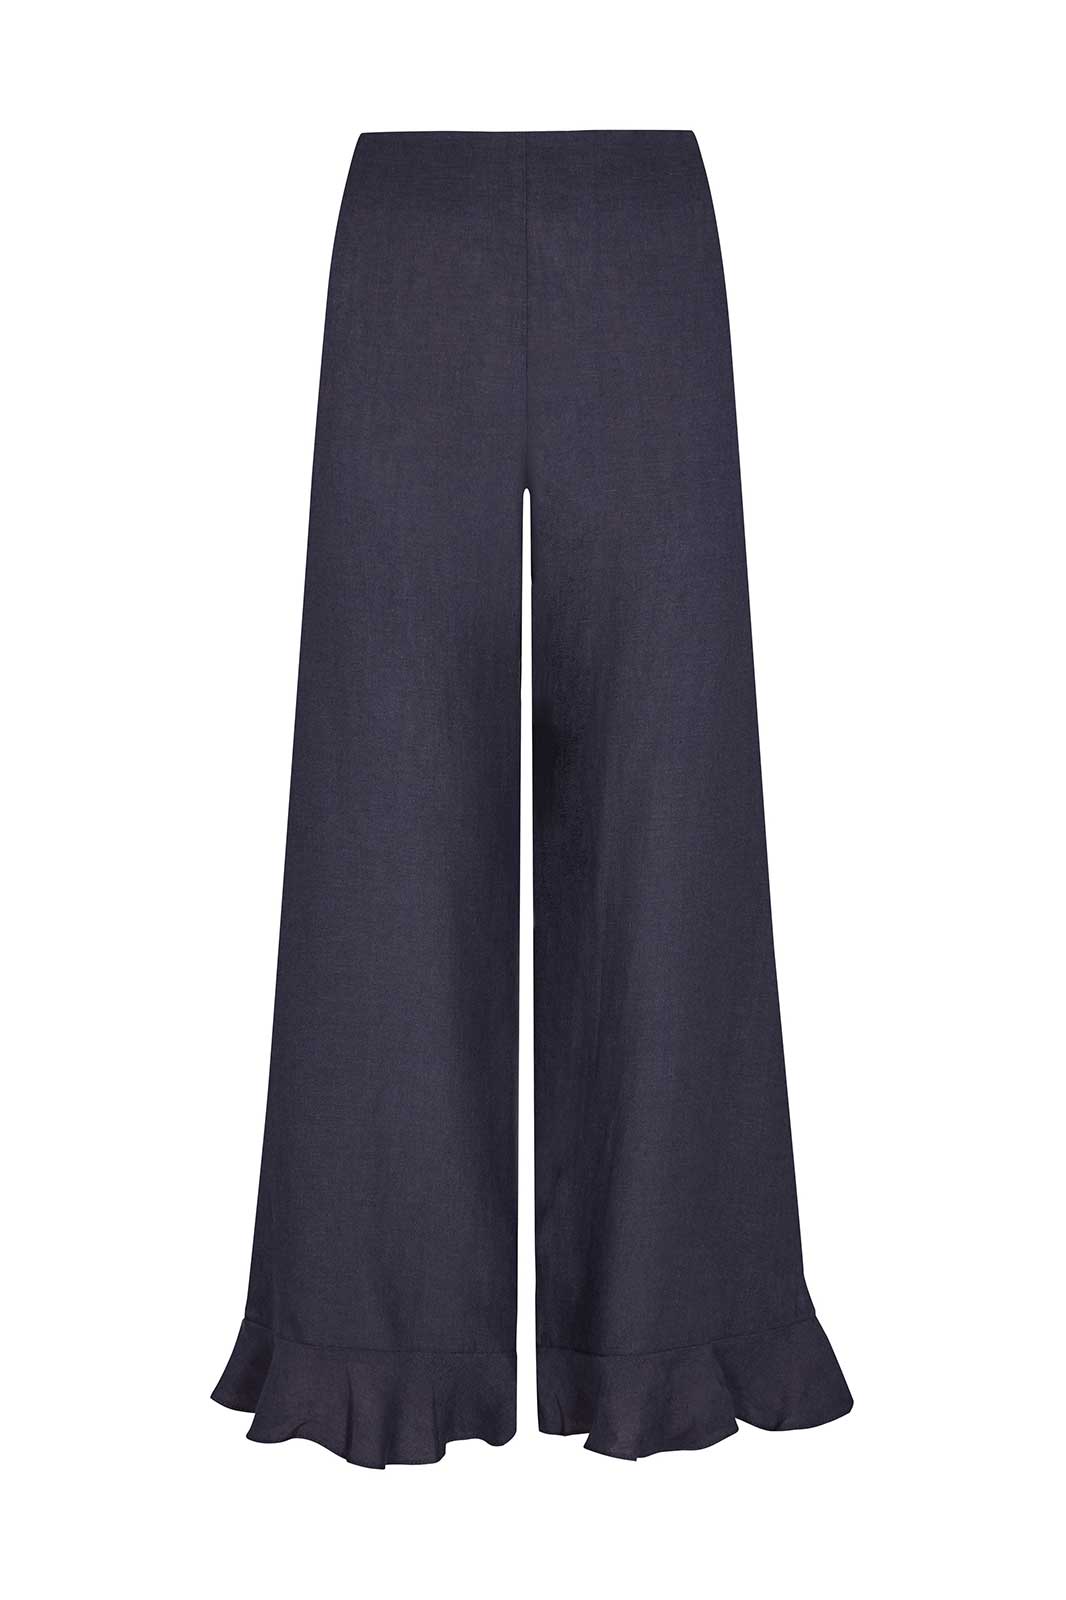 arkitaip Trousers The Clara Ruffled Linen Trousers in Navy Blue